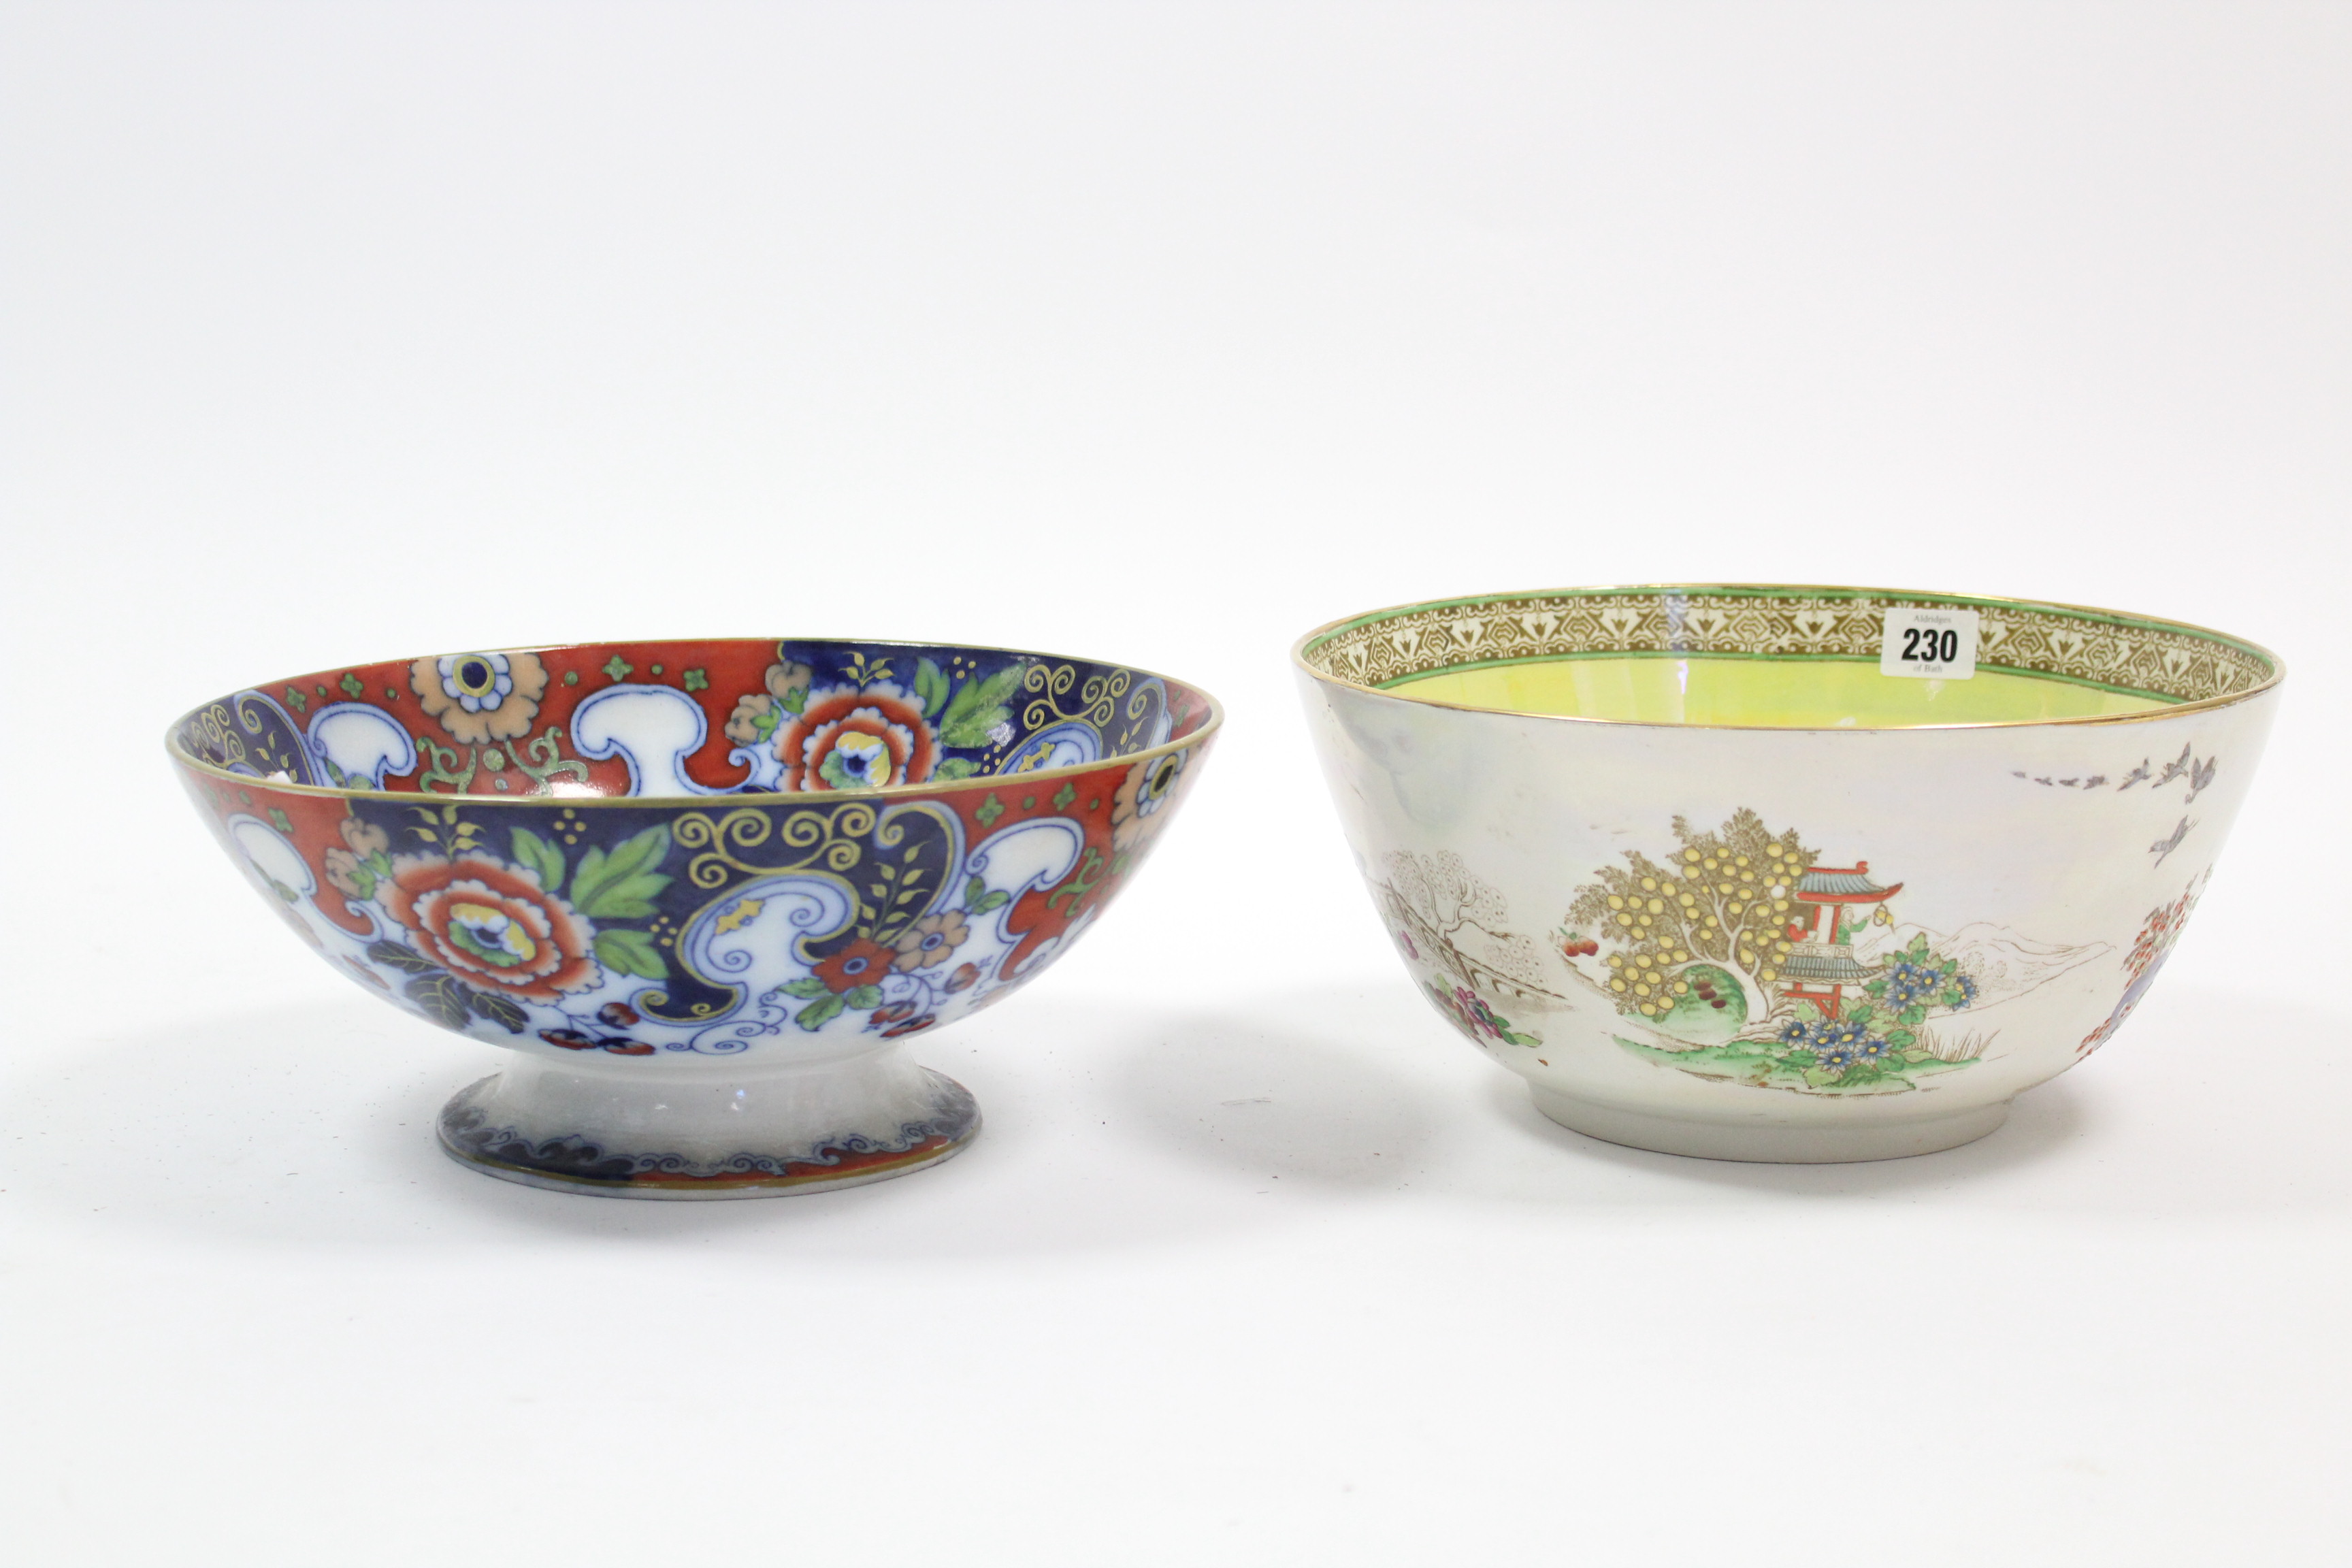 A deep circular fruit bowl with oriental garden landscape to the exterior, & with yellow